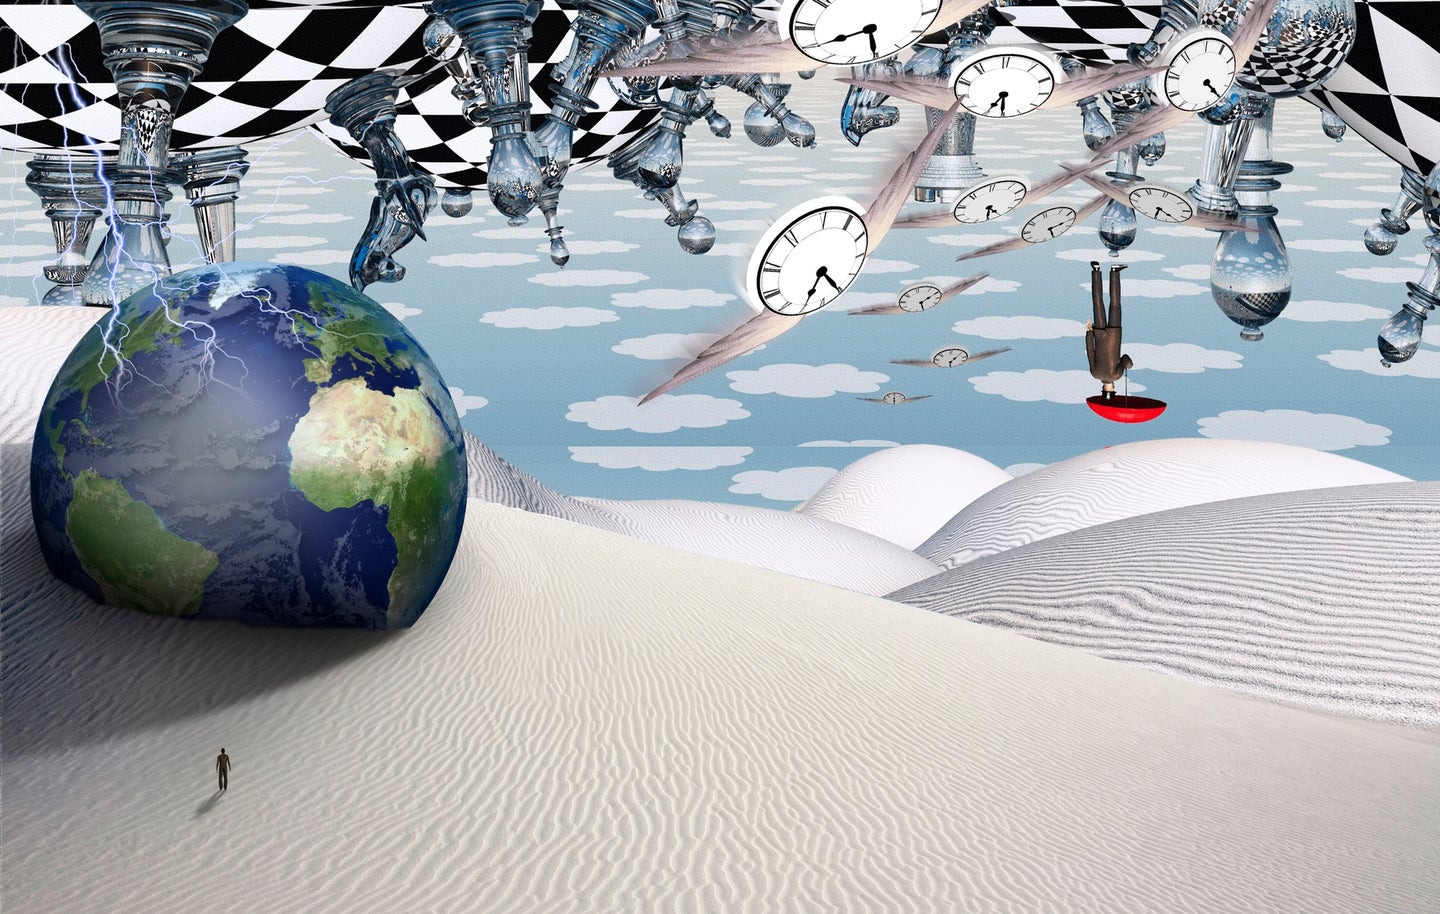 Surrealist digital painting inspired by Dali of flying clocks and chess pieces upside down over sand and the Earth. The motifs symbolize the leap second.